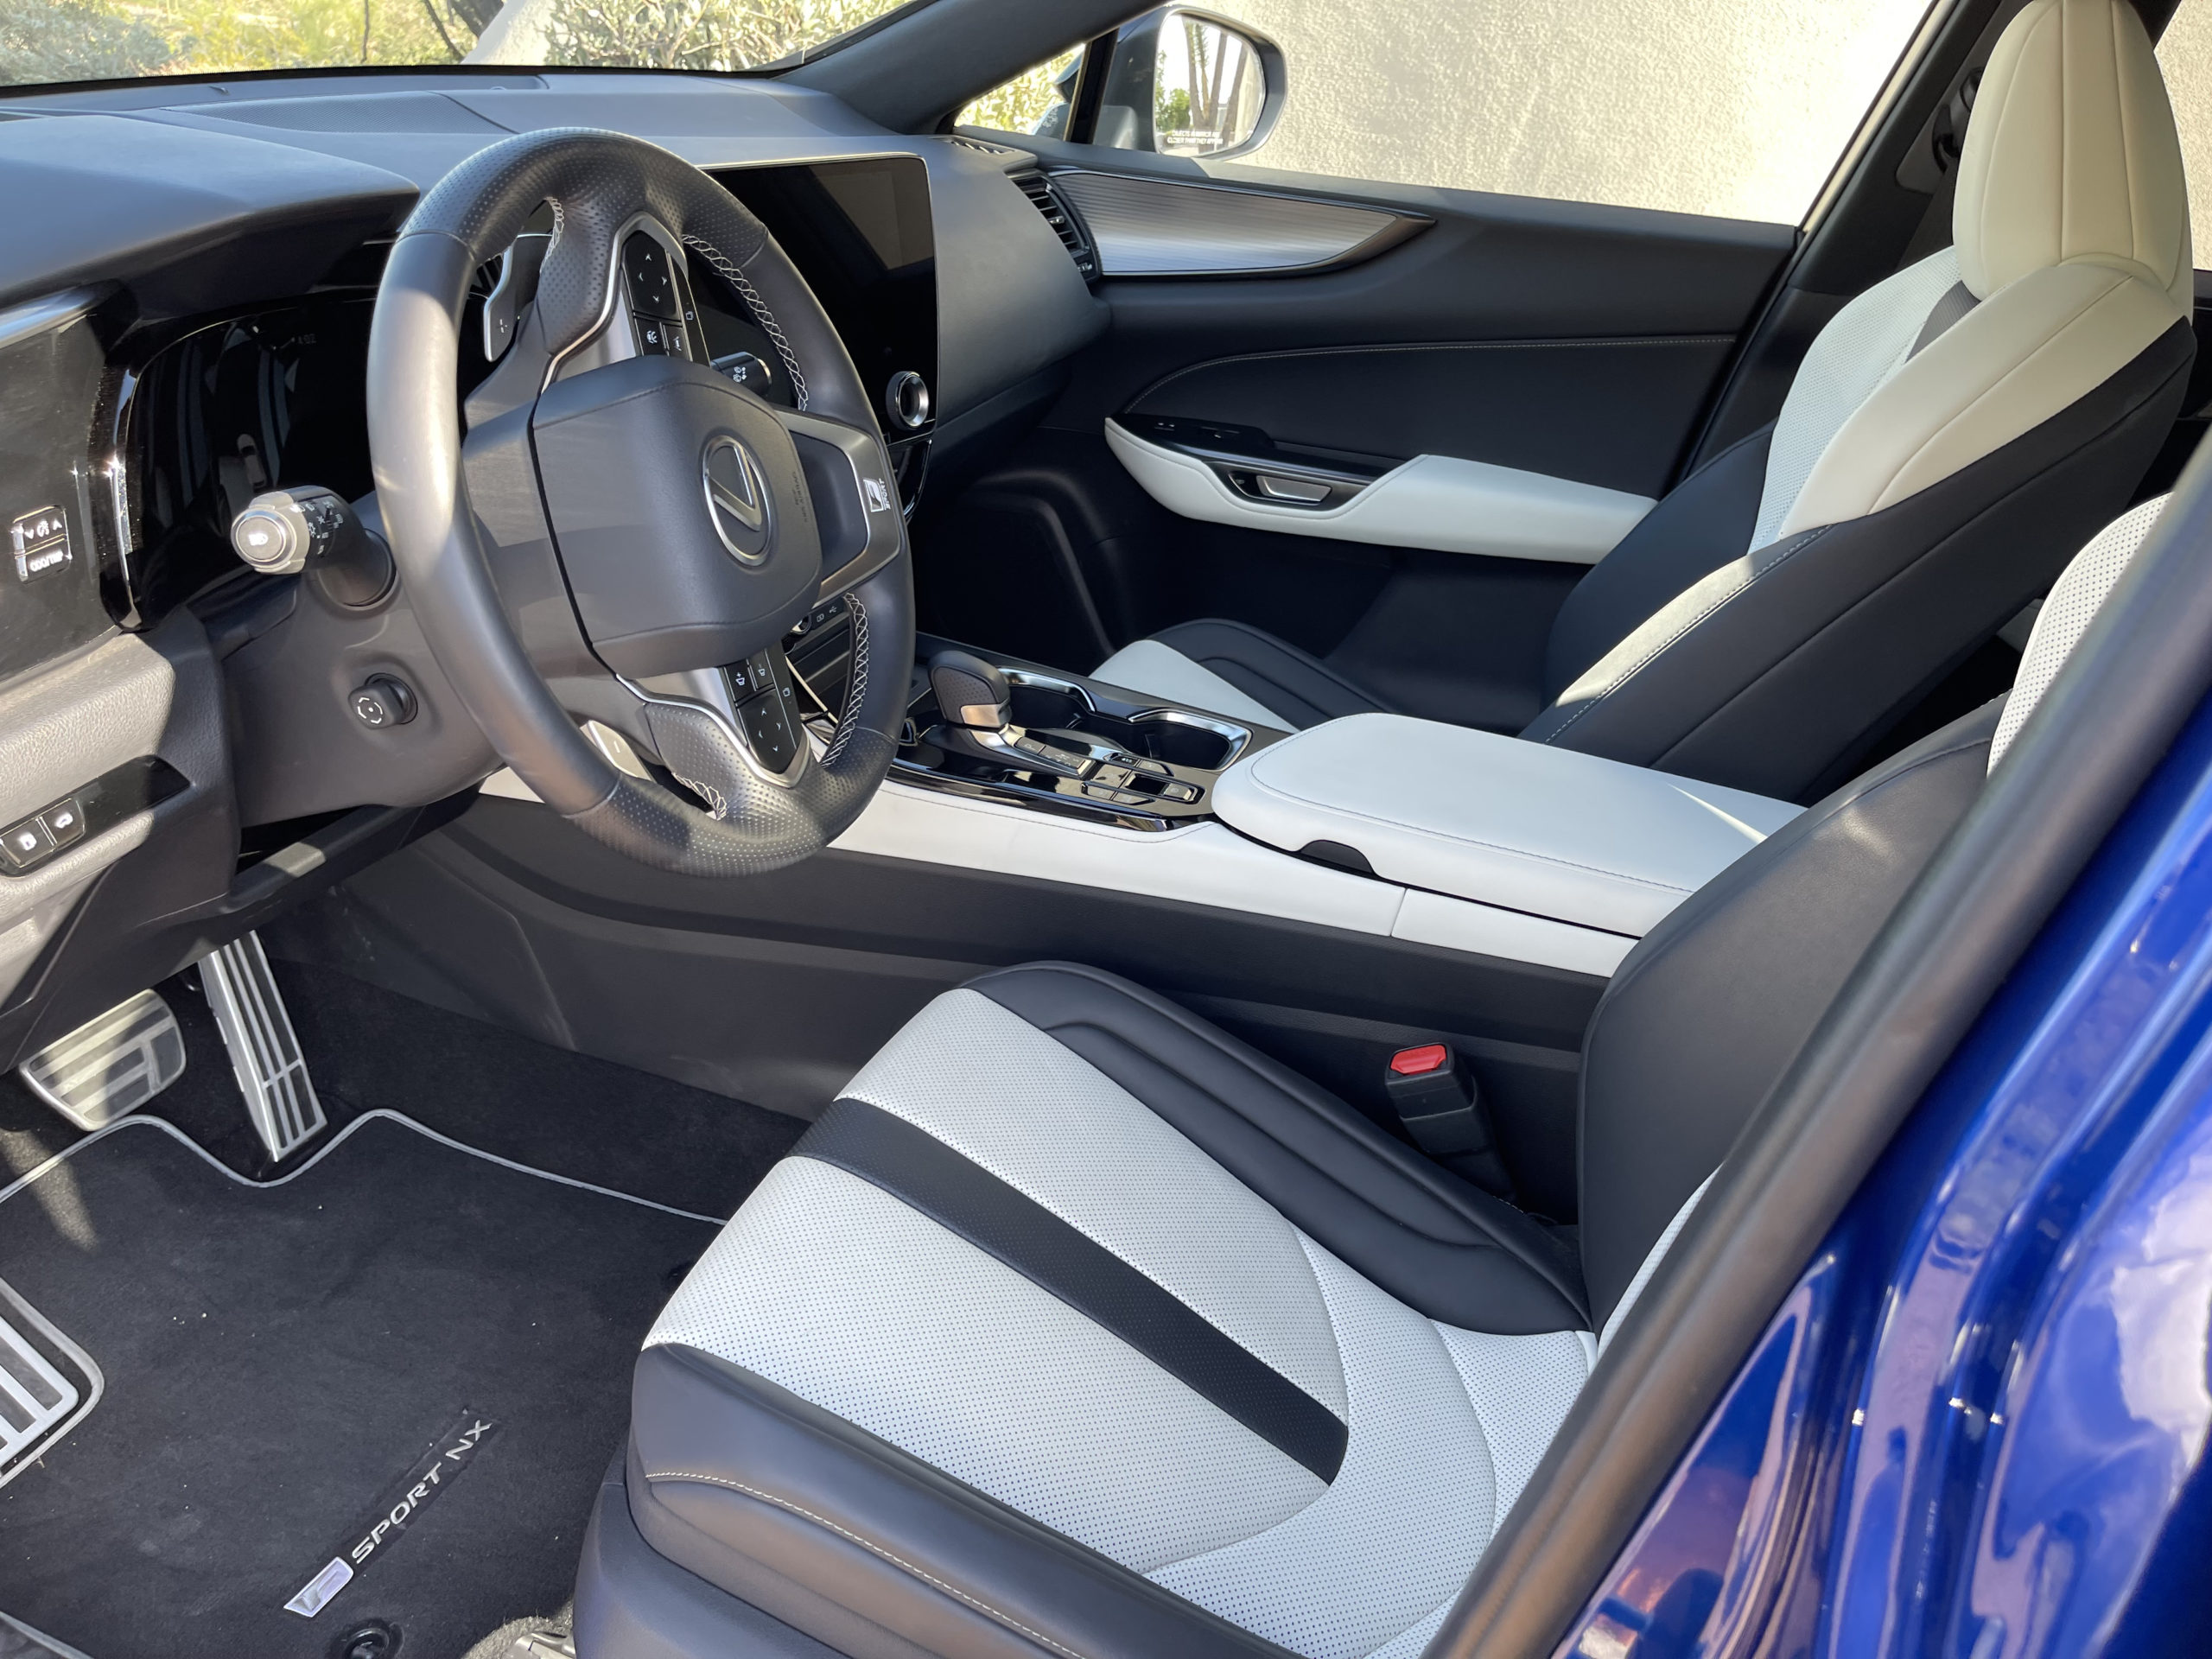 The front driver's seat in the 2022 Lexus NX